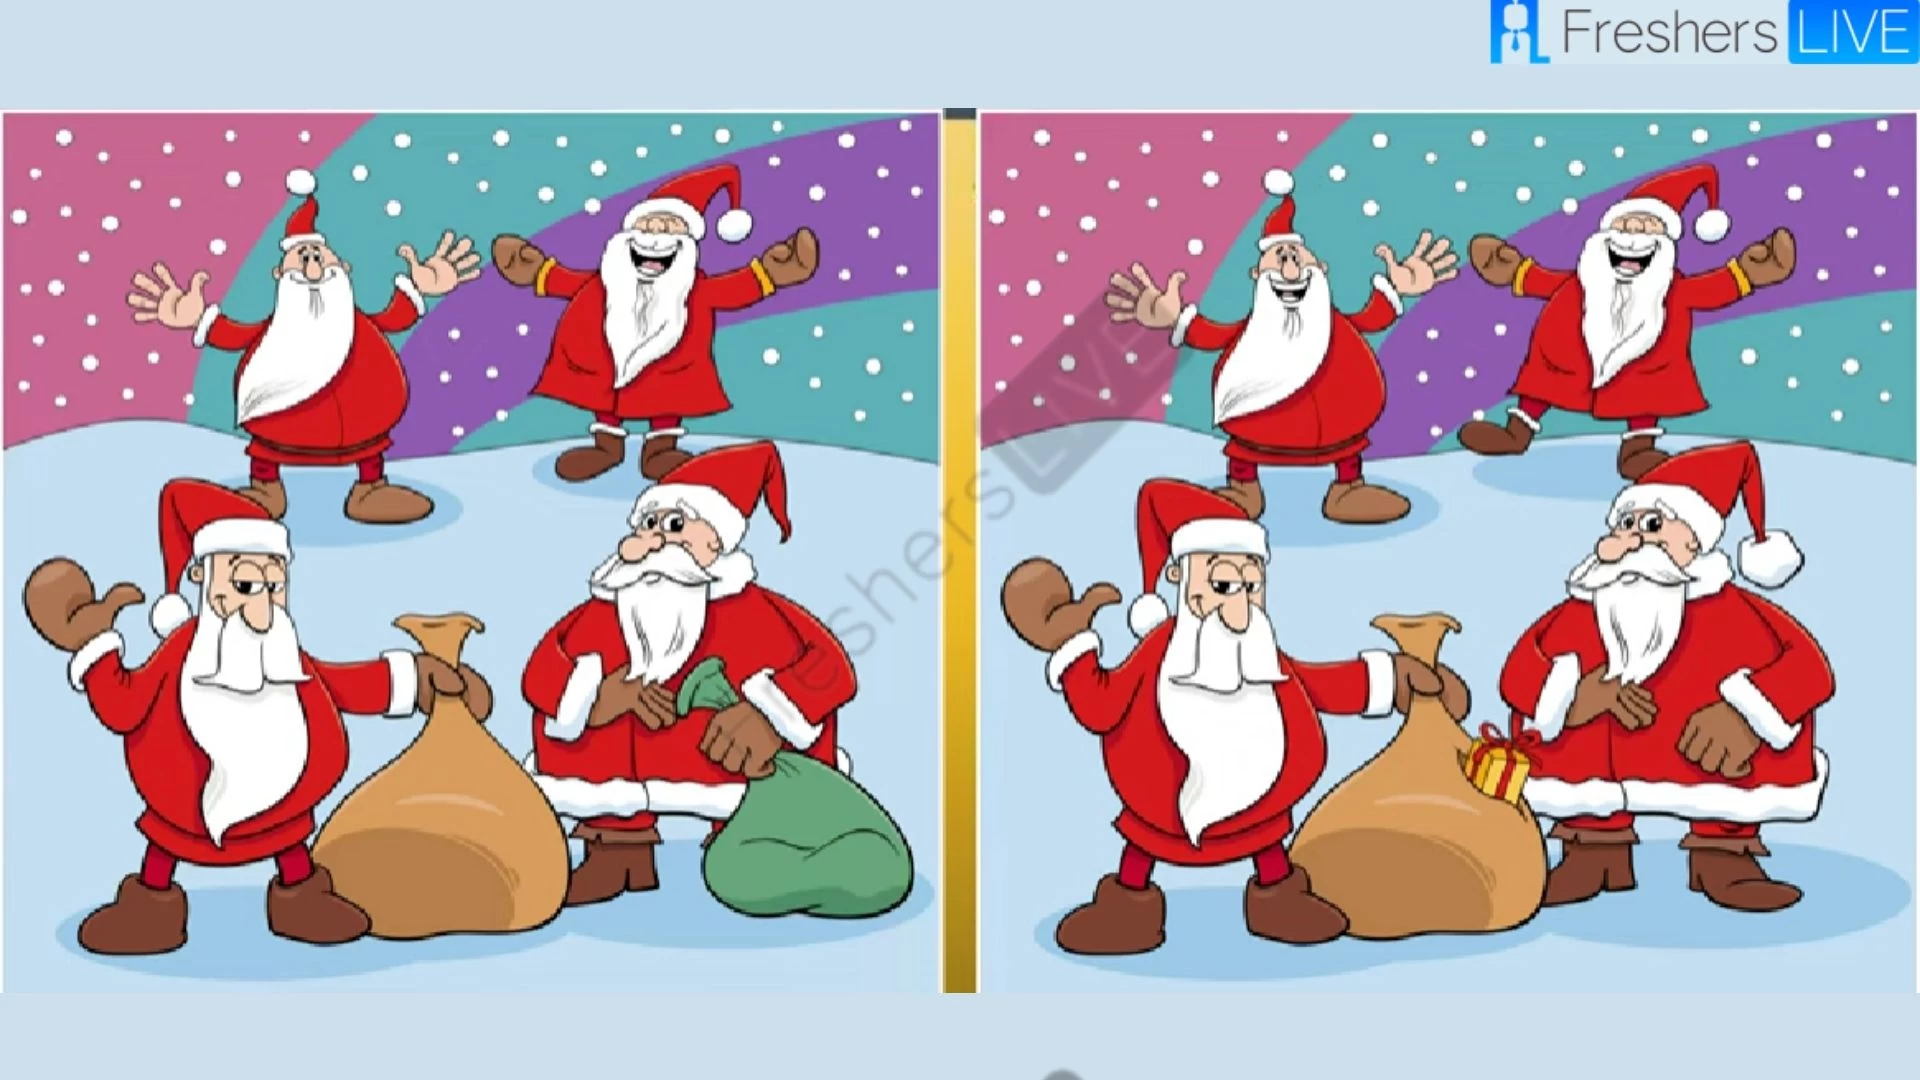 How perceptive are you? Spot 5 differences in Santa Claus pictures within 18 seconds